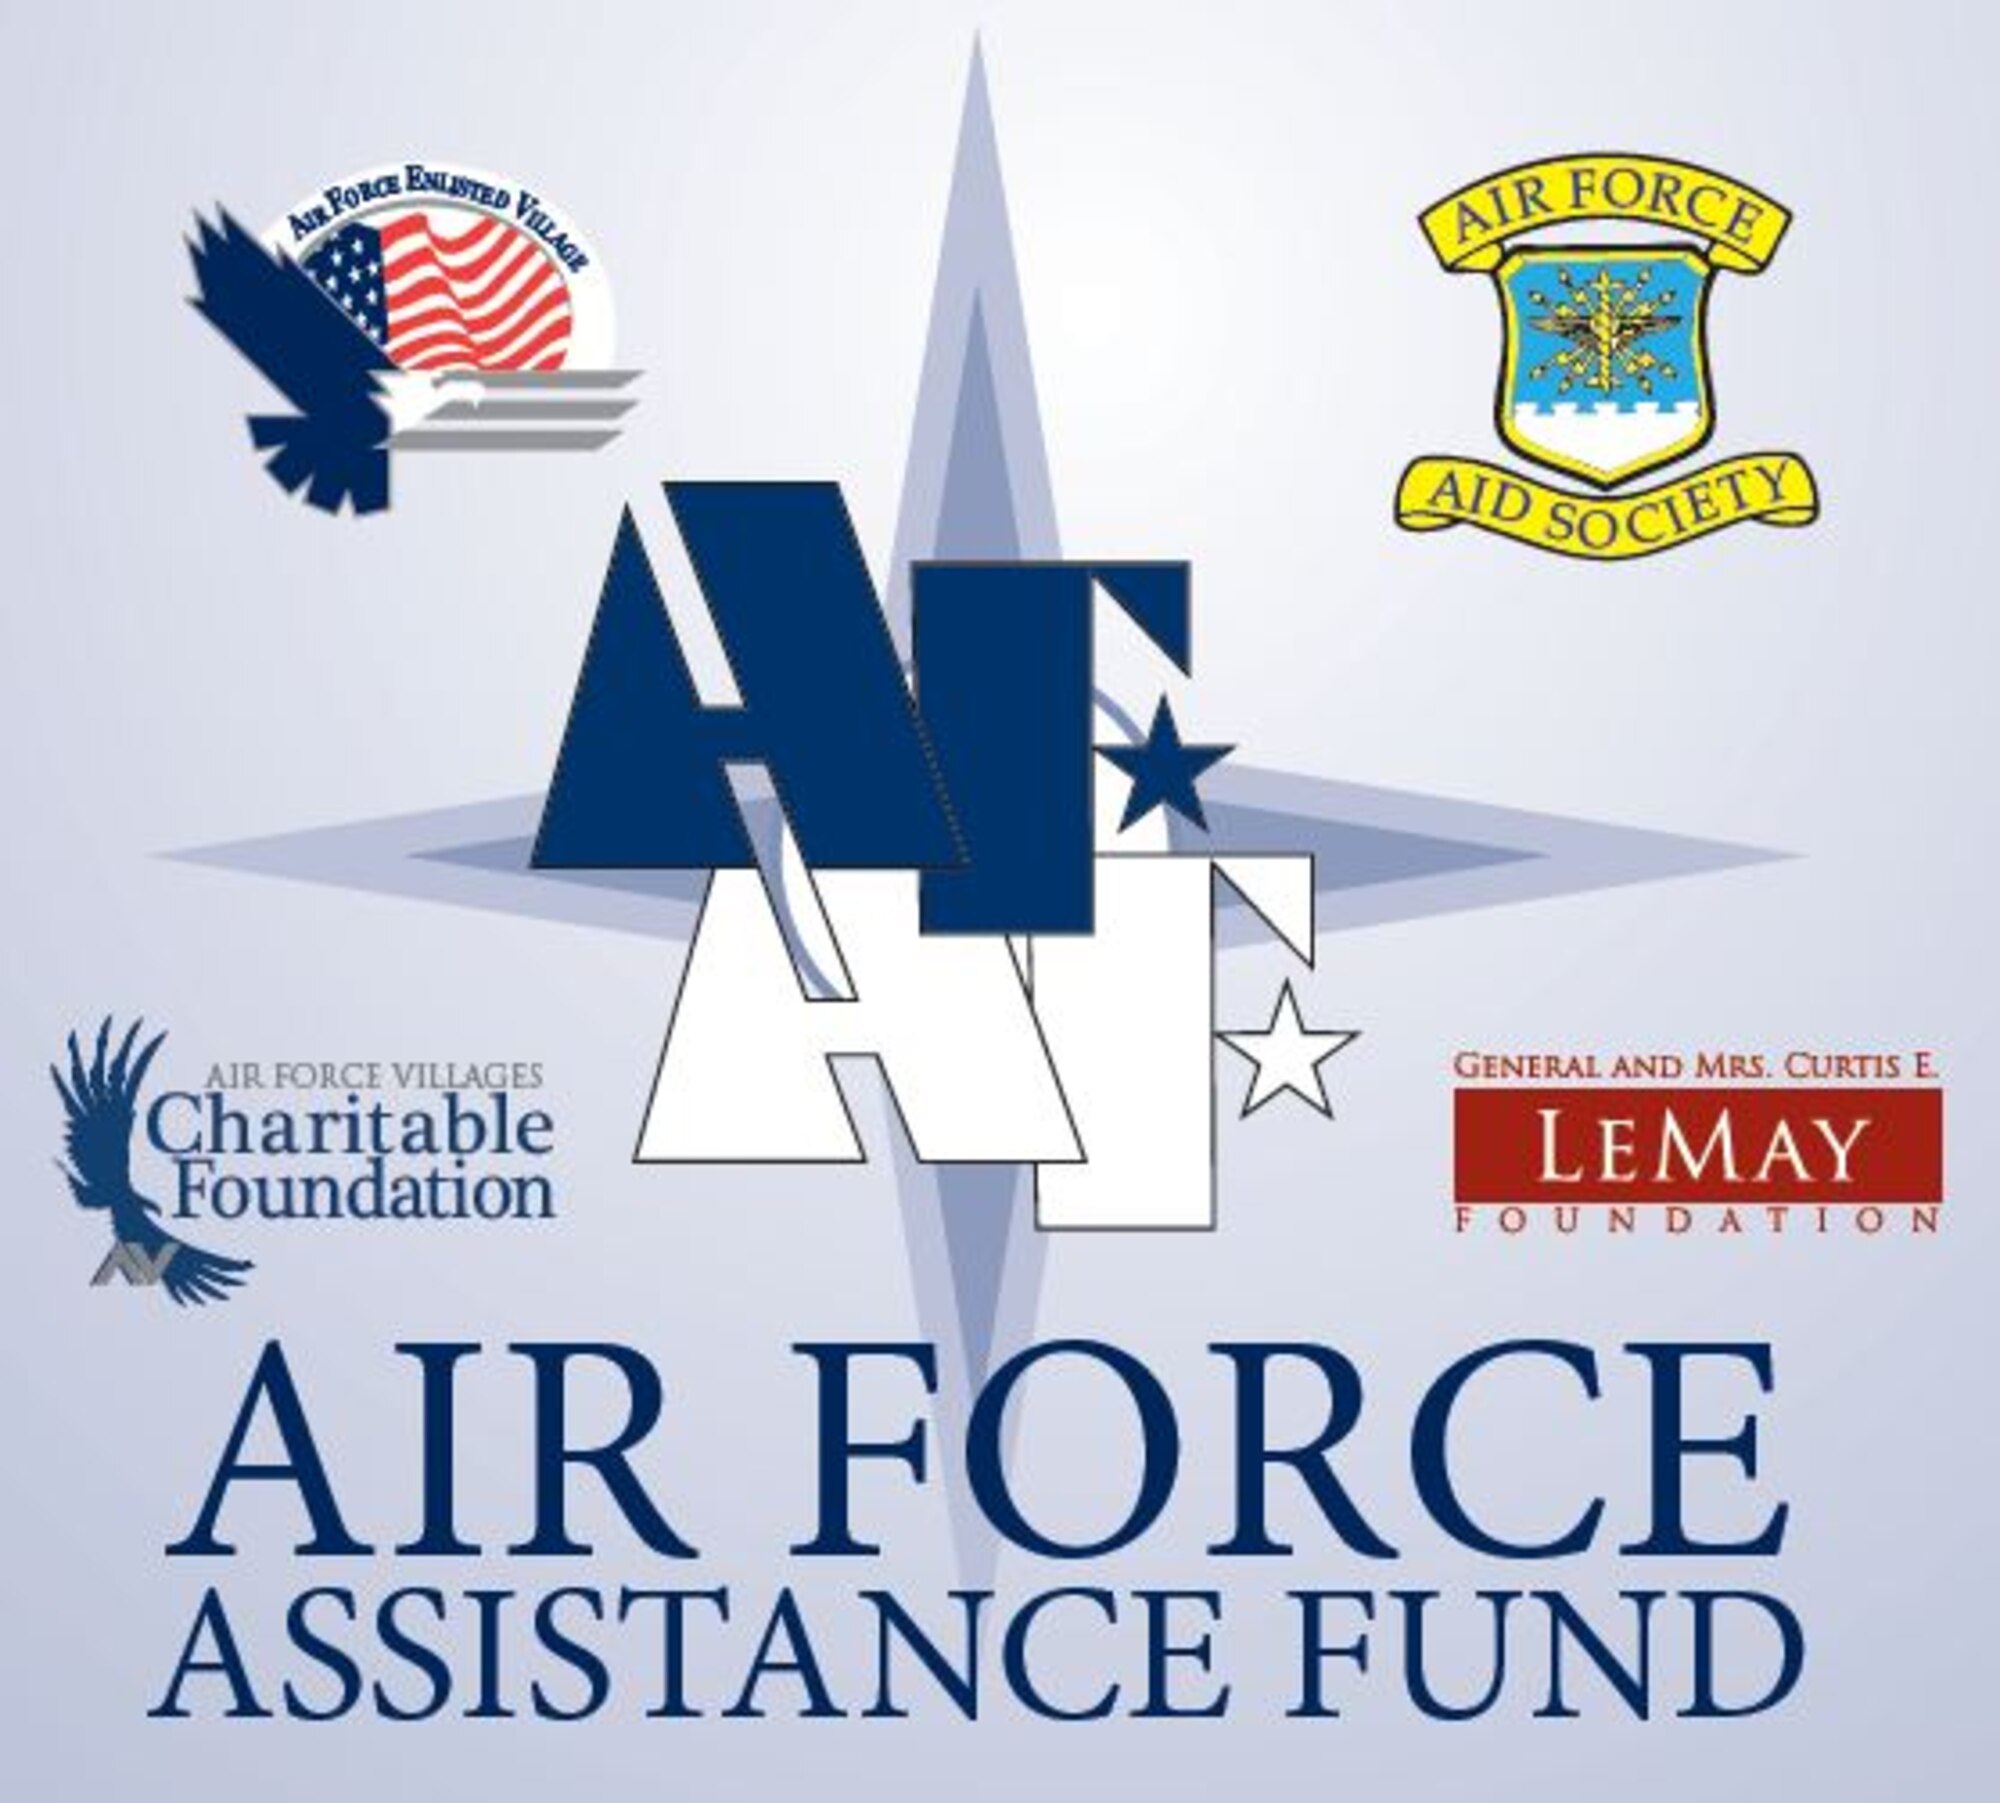 Air Force Assistance Fund Flier (Courtesty Graphic)